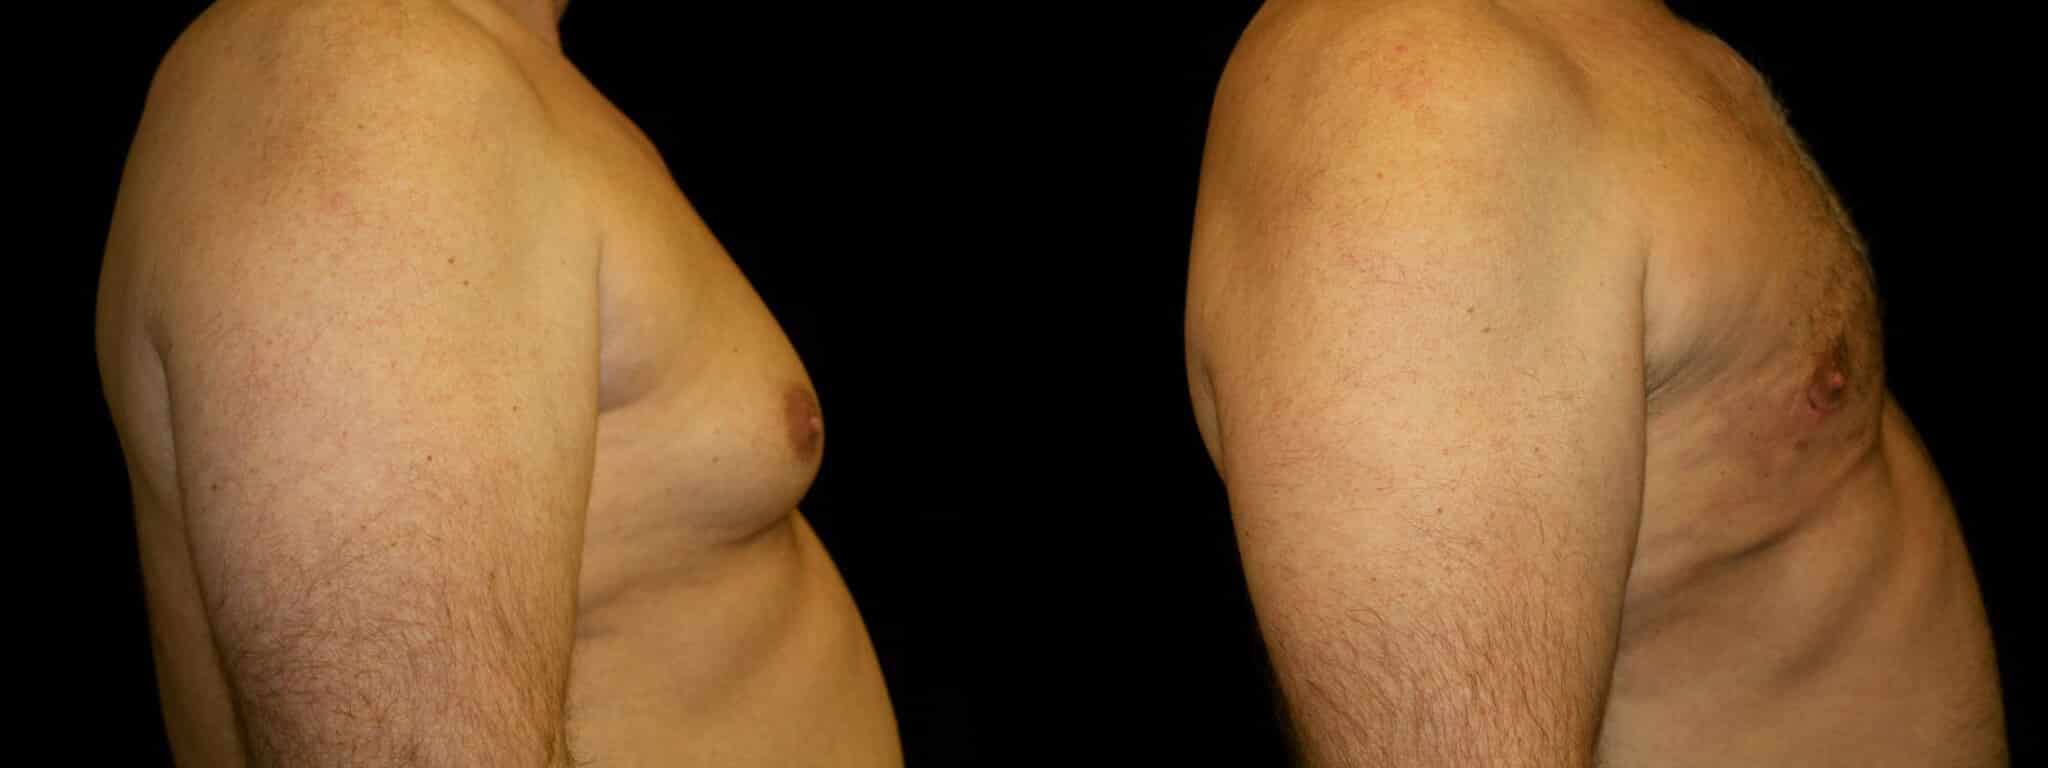 Gynecomastia Patient 1 Before & After Details